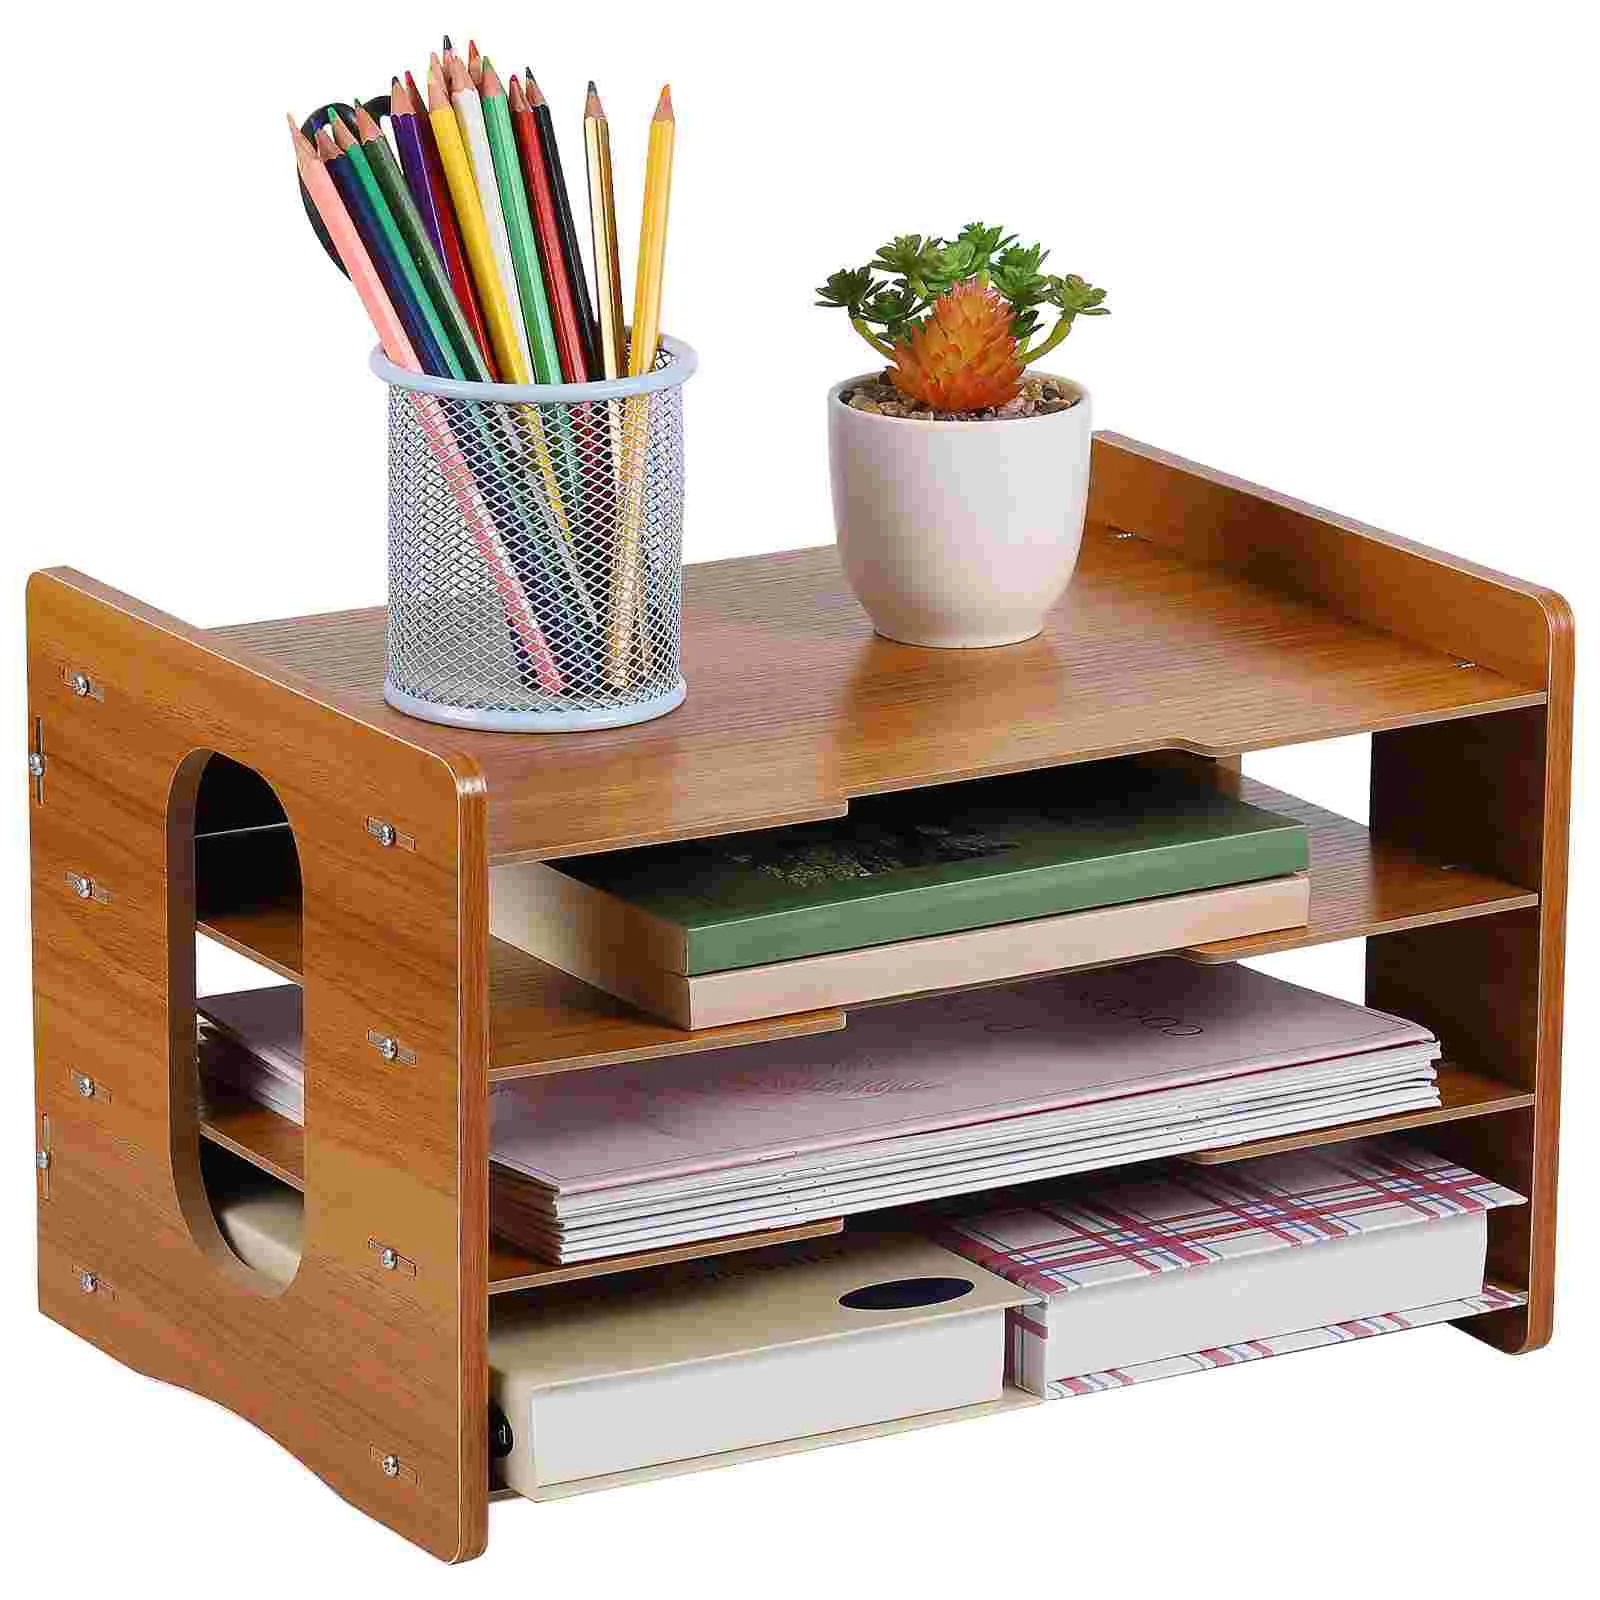 

File Organizer Wood Paper Organizer Wood Desk Organizer Paper Tray For Office Home Layers Multifunction Document Trays